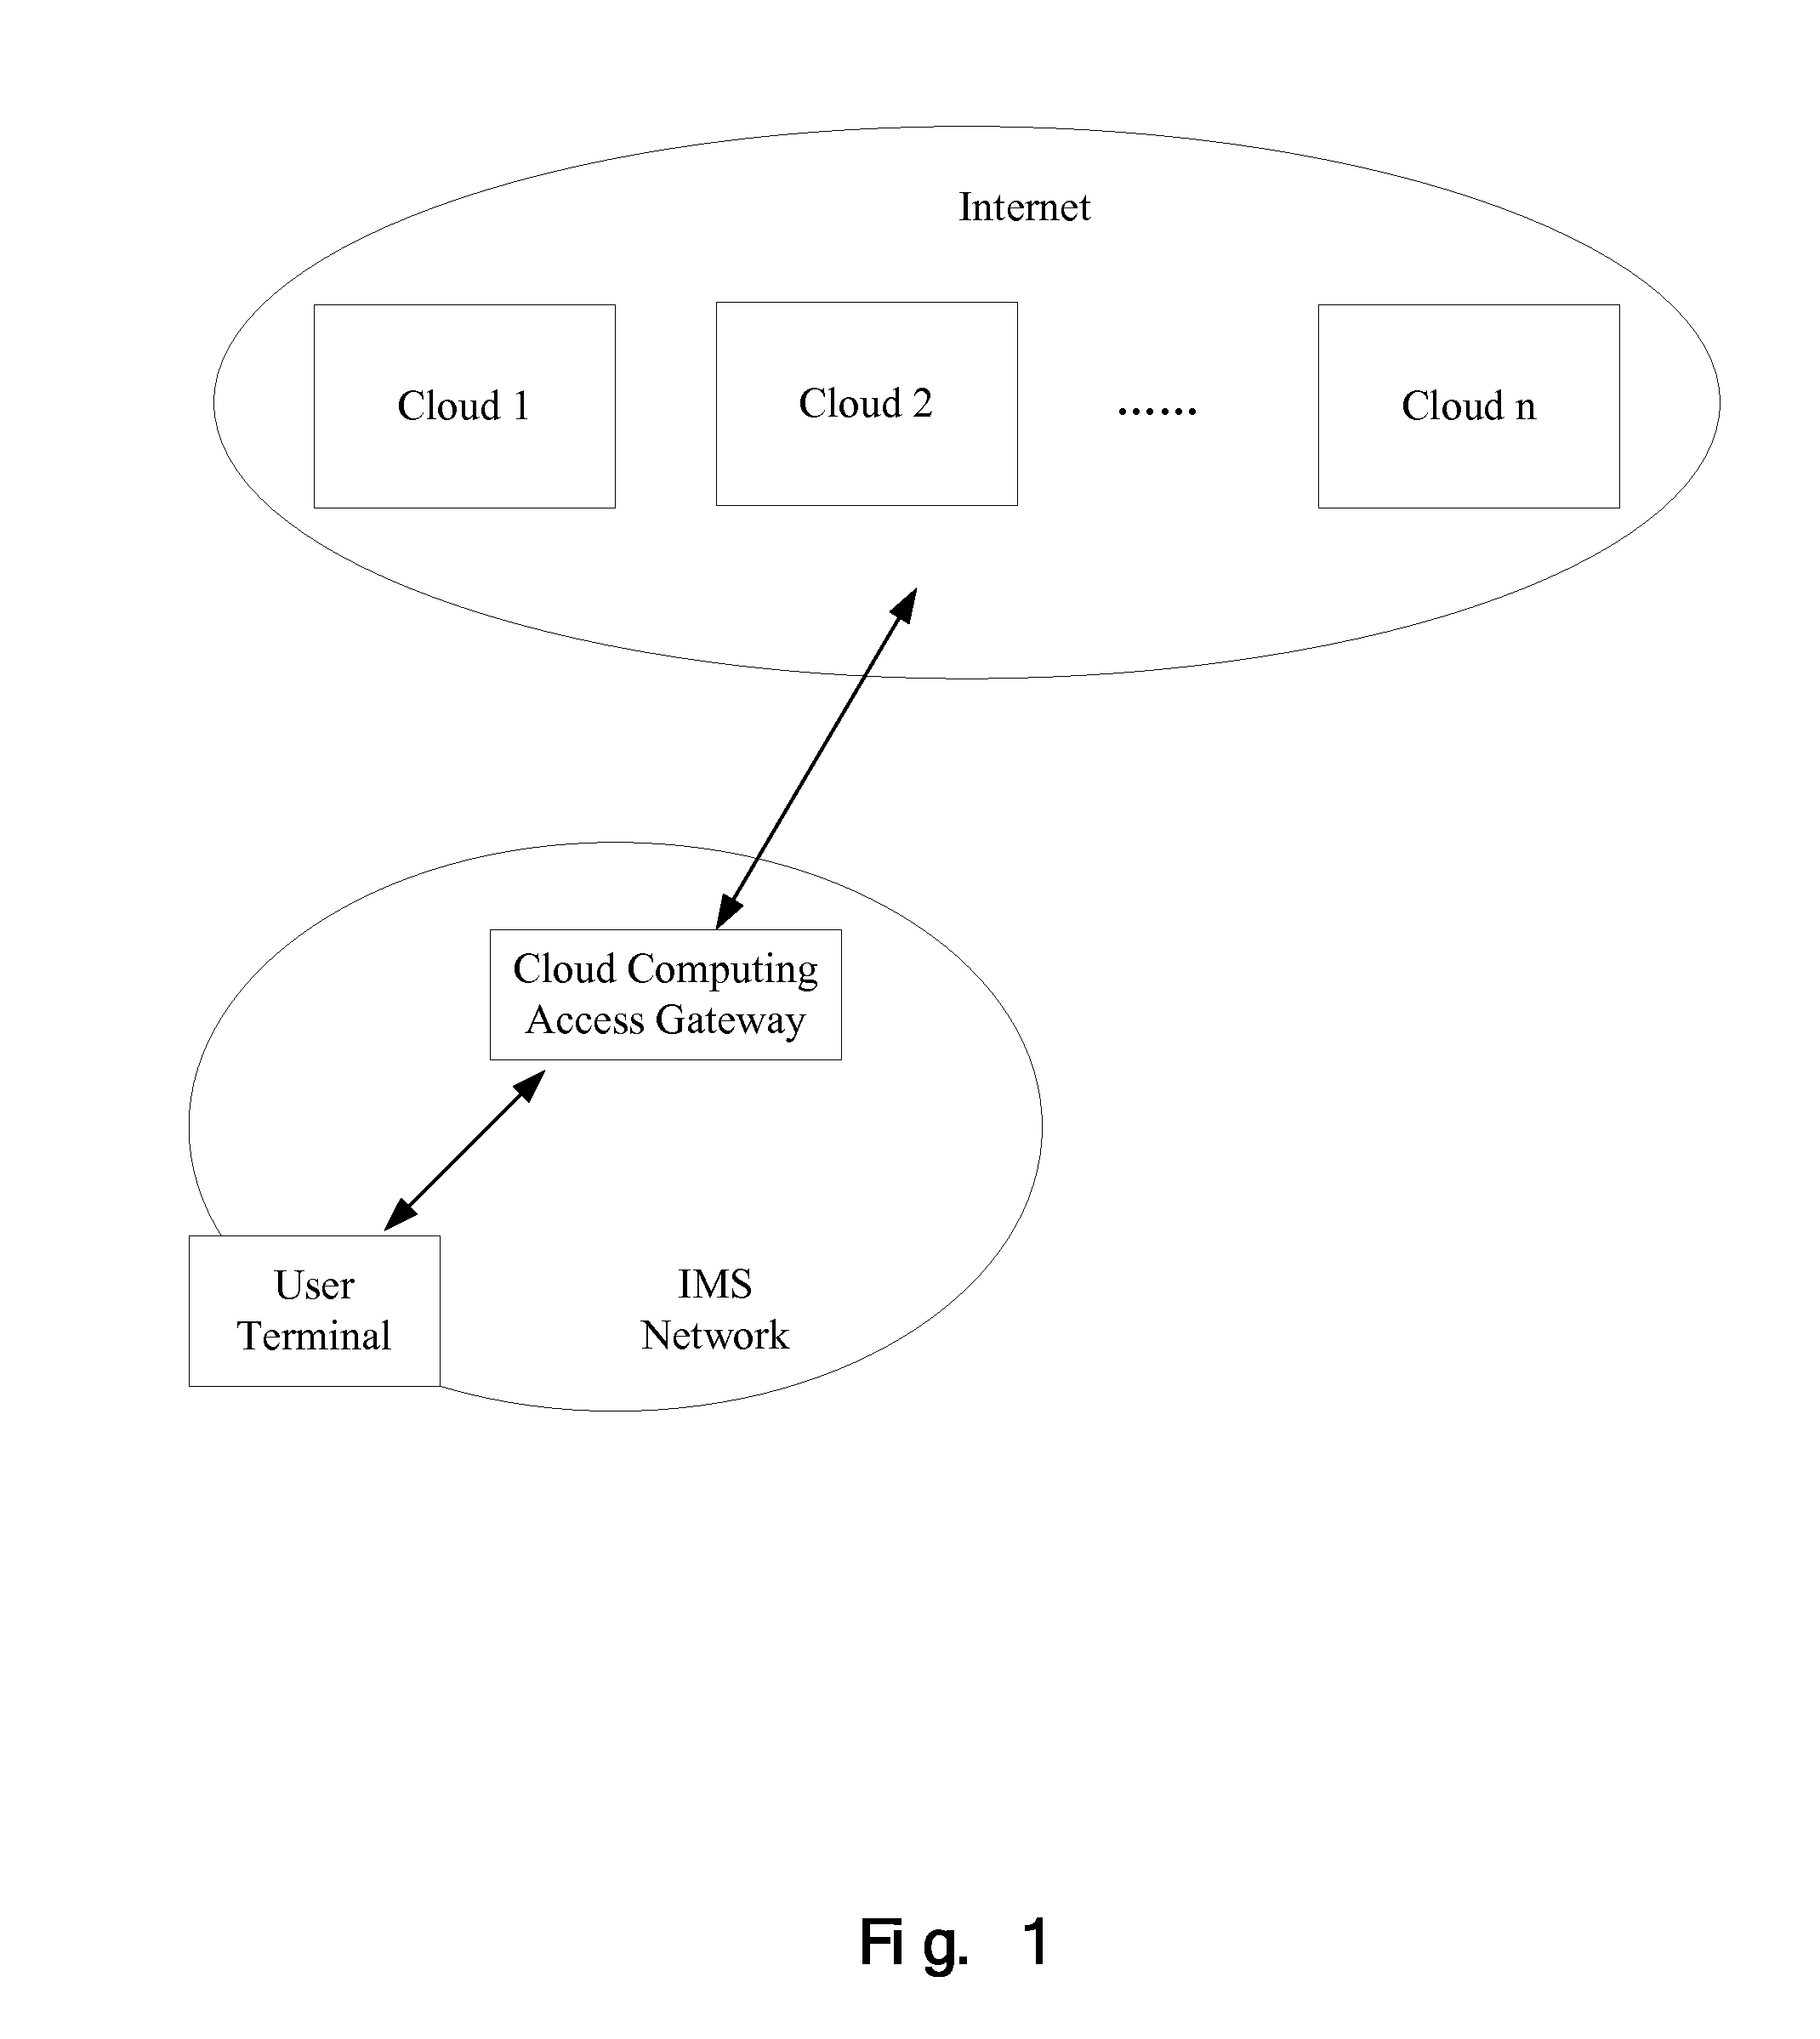 Cloud computing access gateway and method for providing a user terminal access to a cloud provider